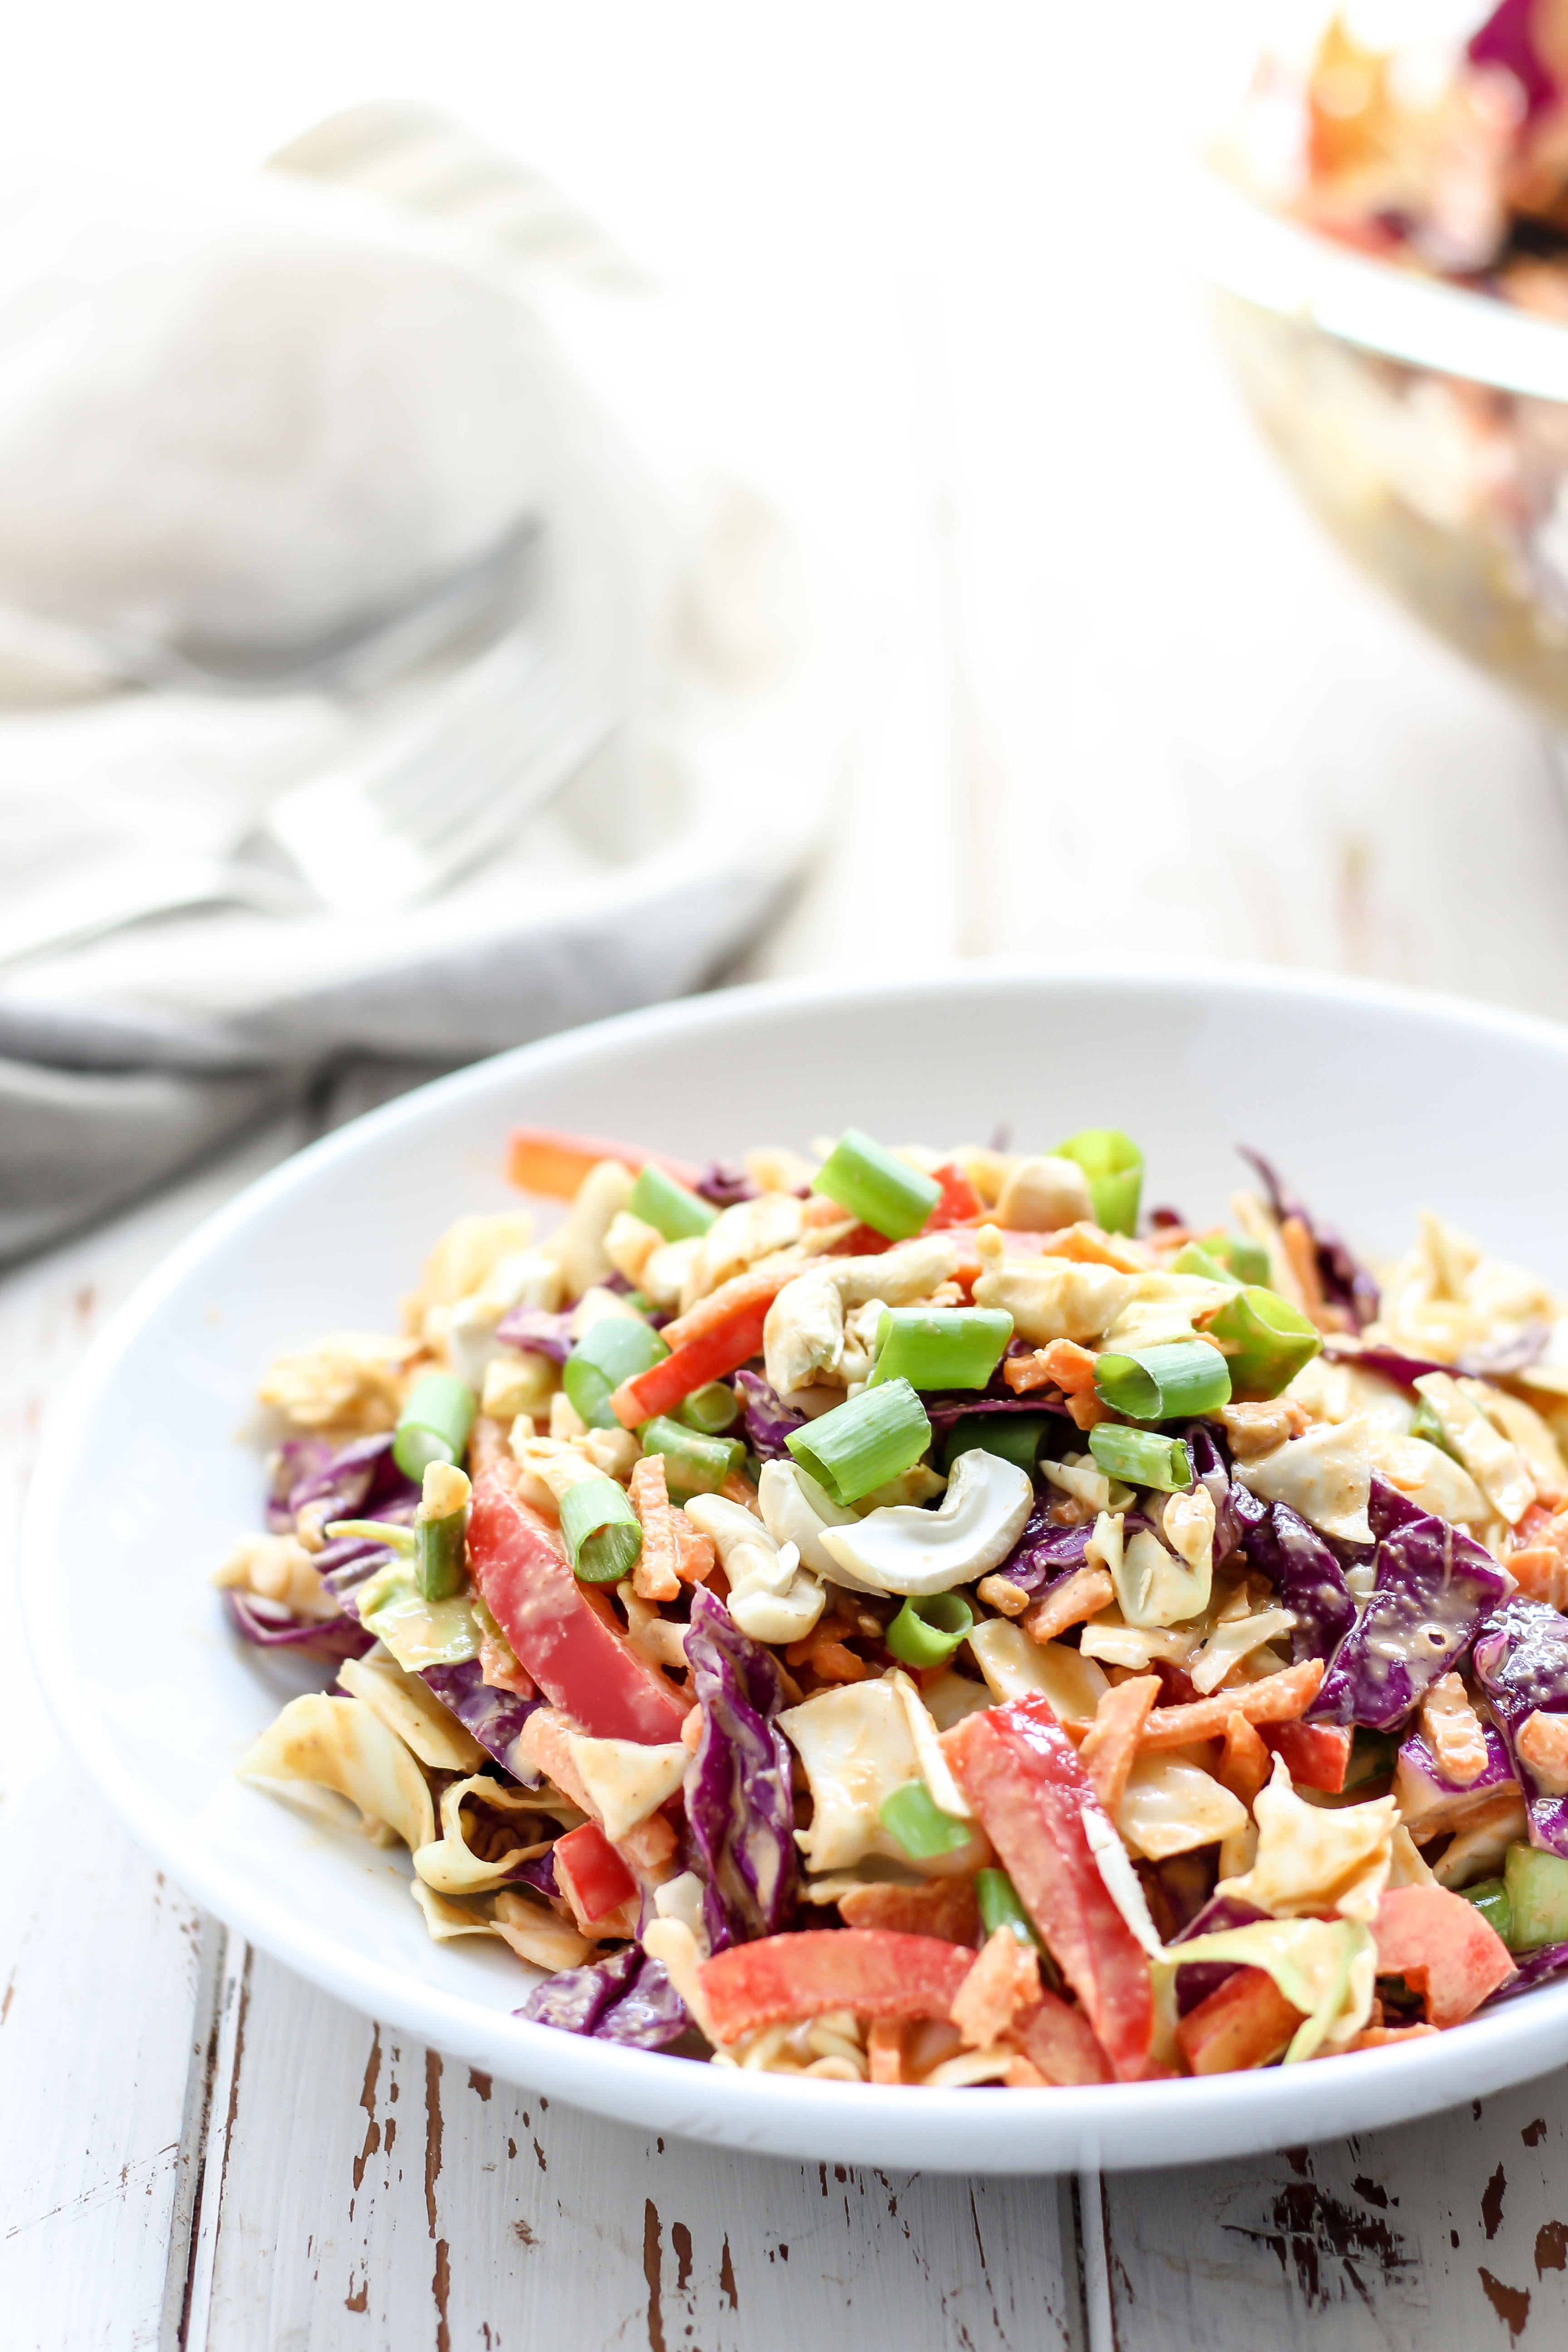 Throw some Asian flare into your coleslaw and make this Thai slaw with cashew curry dressing. Flavorful, fun, and a great addition to any BBQ.